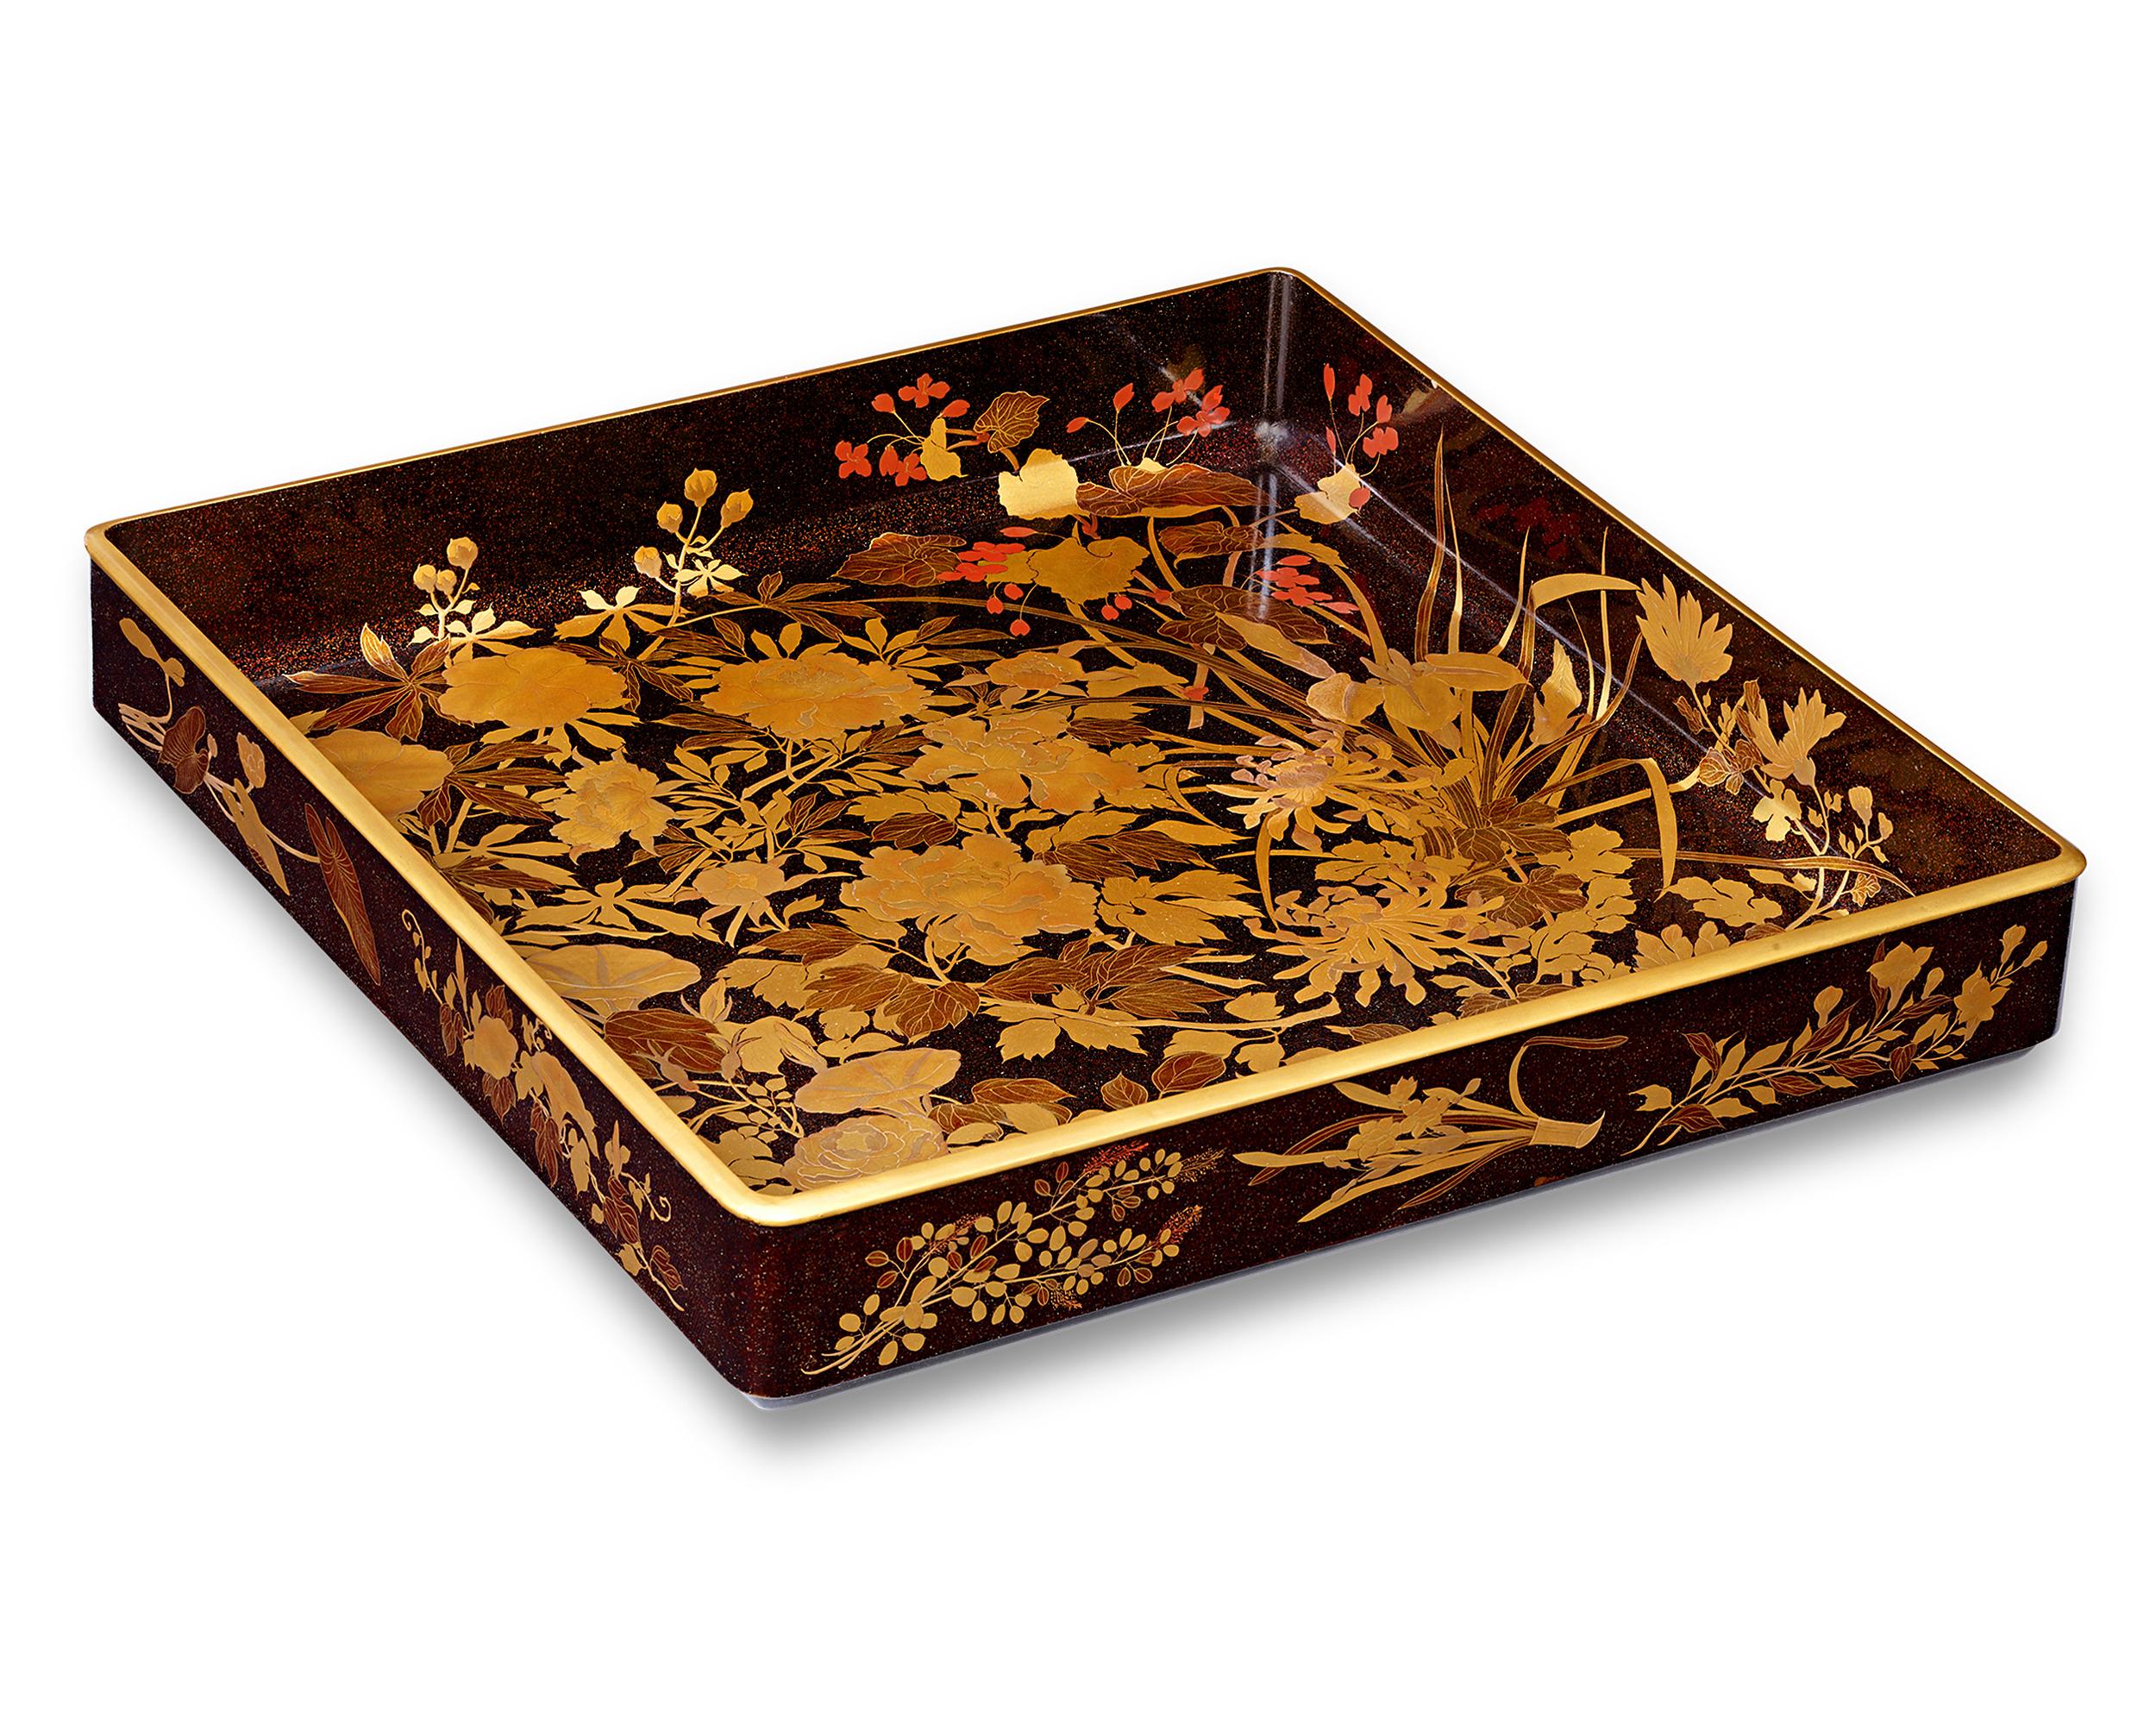 This Meiji-period lacquer tray represents the mastery of Japanese craftsmen in the art of lacquer work. Precious materials are precisely inlaid in the lacquer base, creating a highly illusionistic three-dimensional effect. Gold lacquer borders the